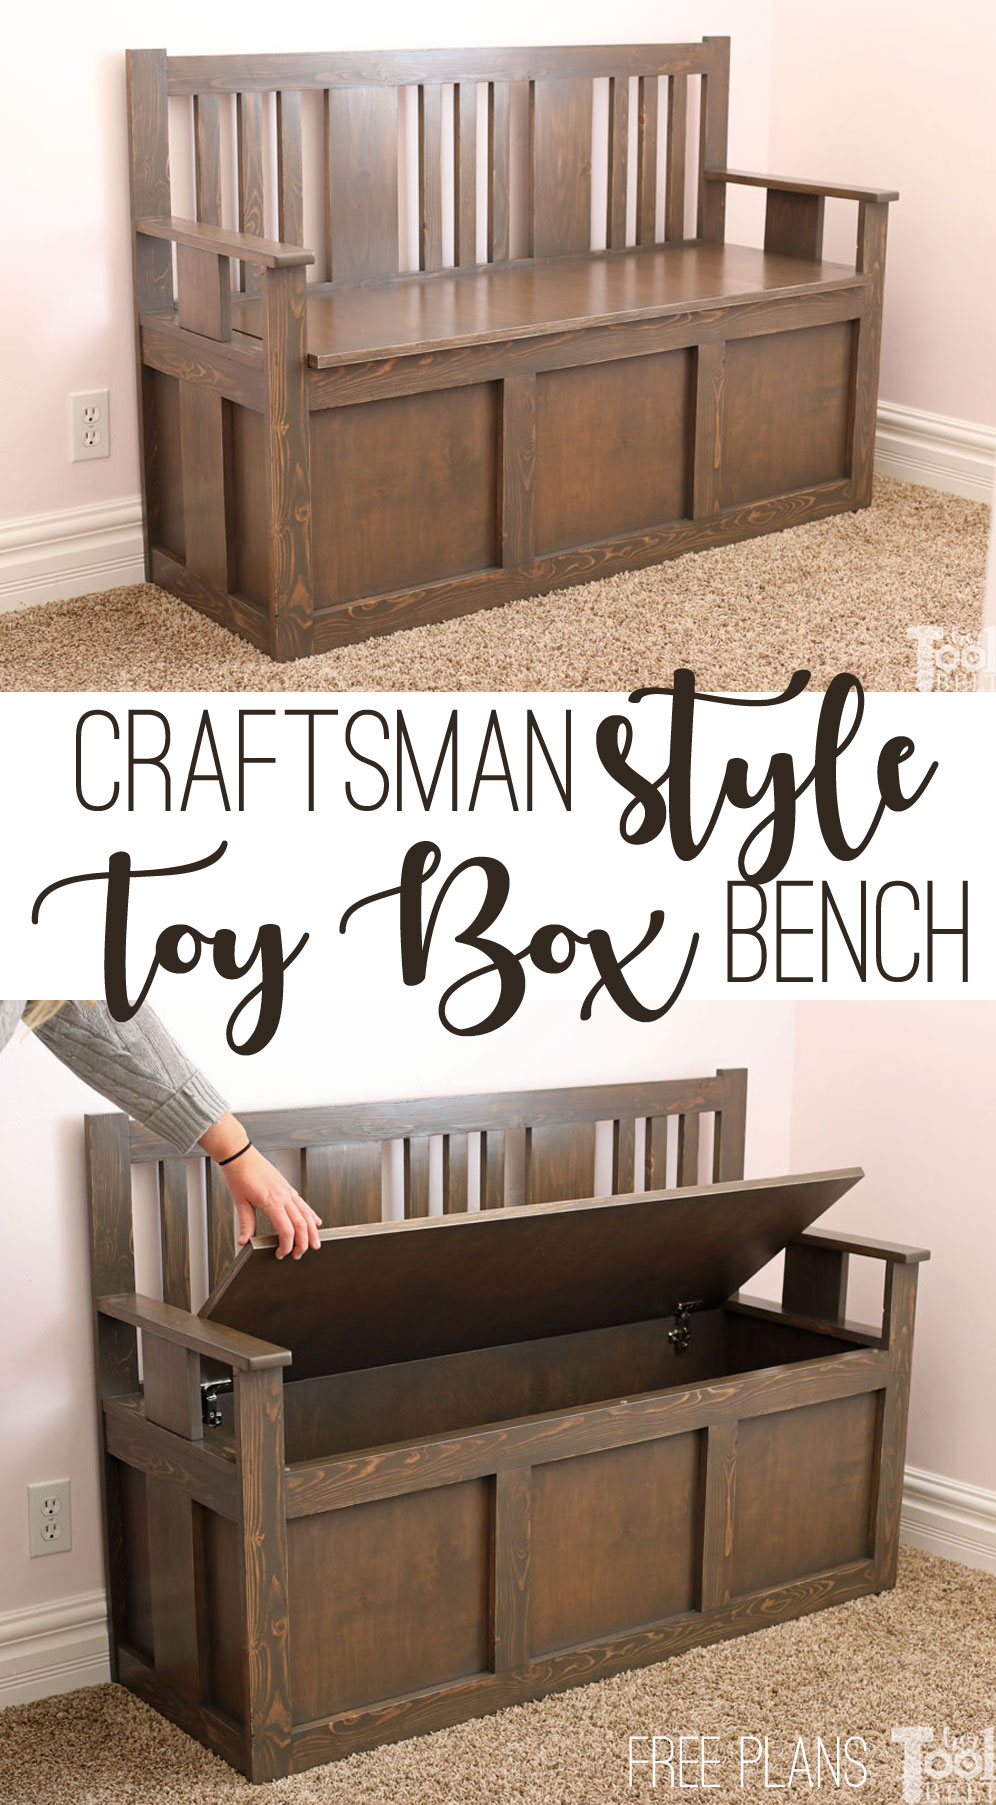 Craftsman Style Toy Box Bench Build Plans Pin Her Tool Belt